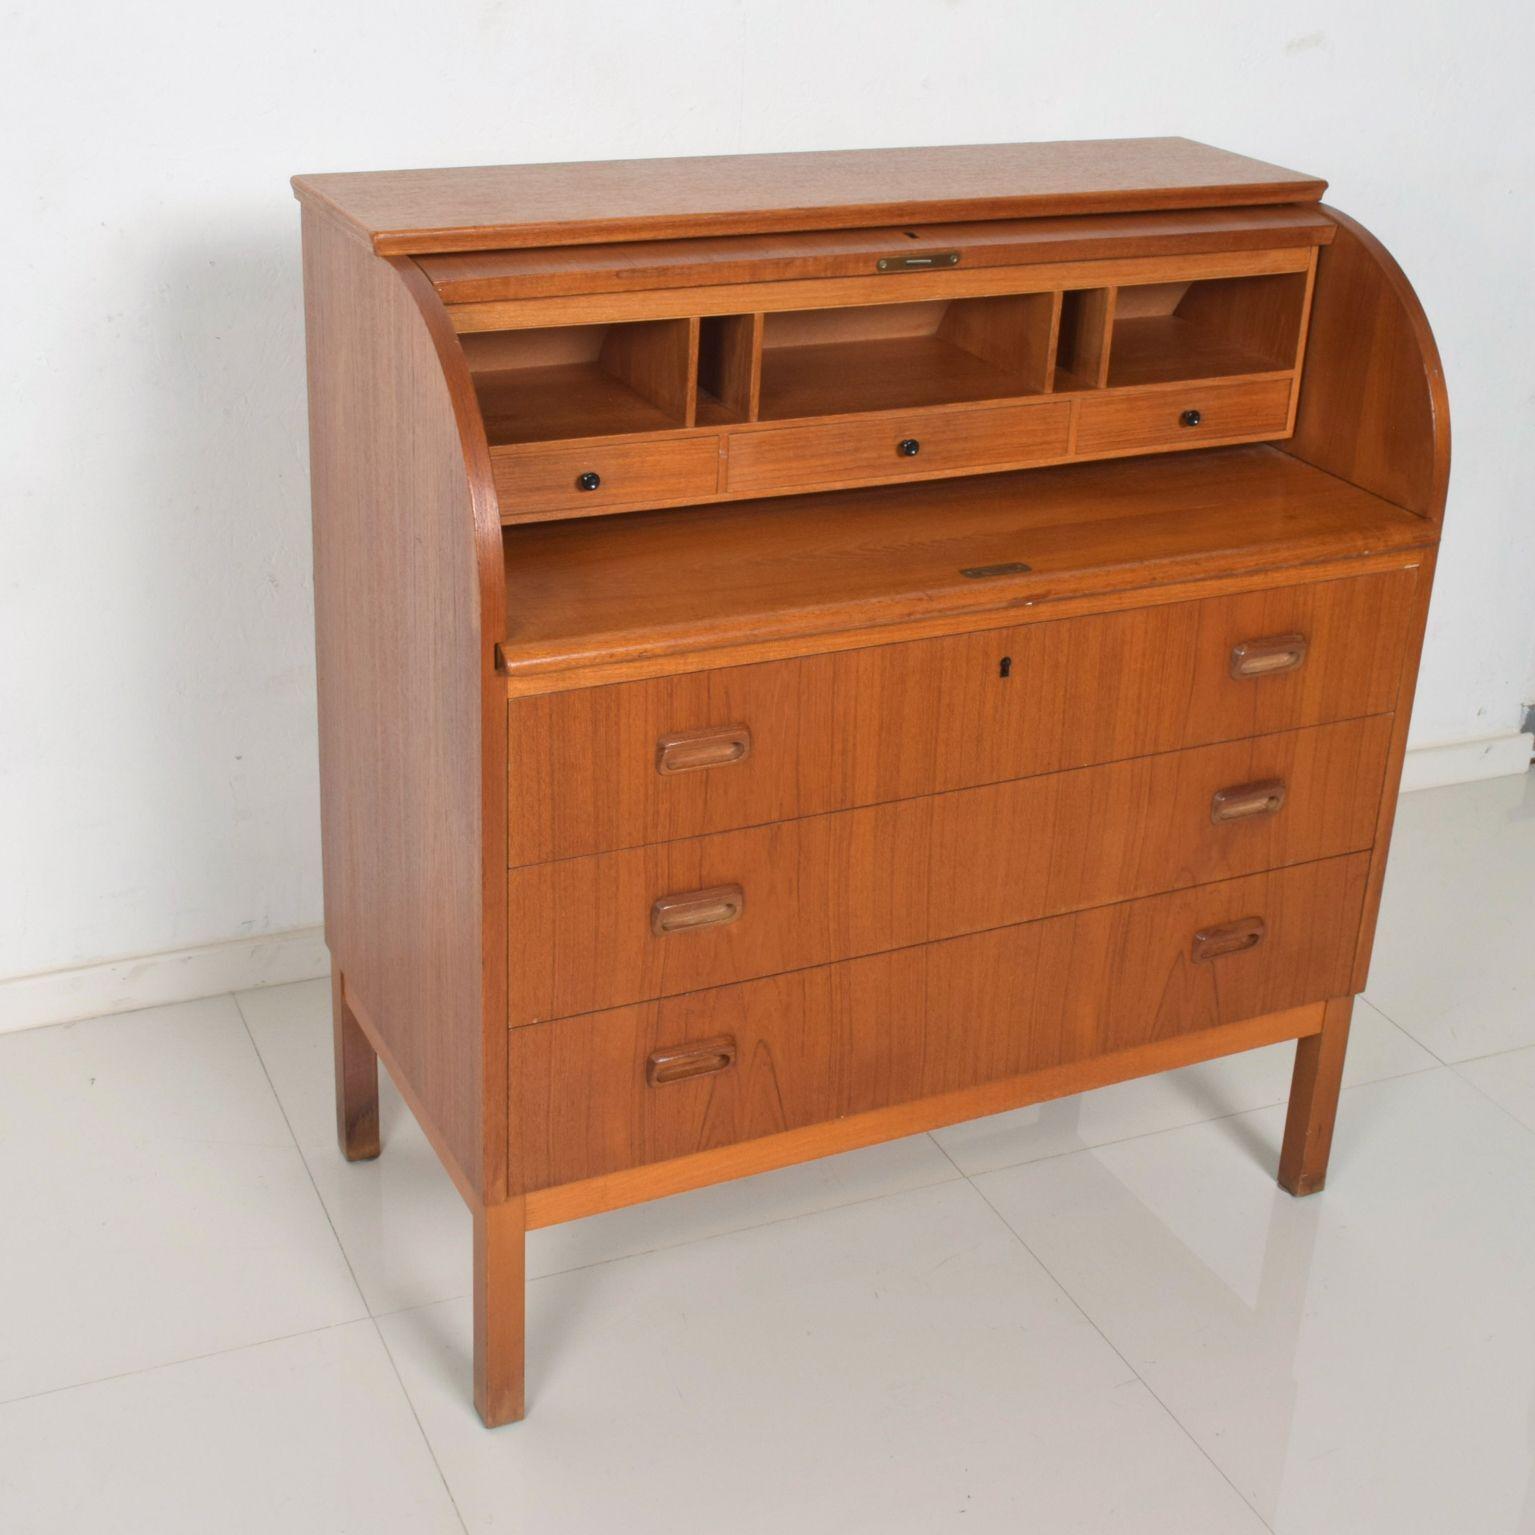 Swedish Modern Secretary Roll Top Desk in Teak Wood, 1960s 
Ample functional space- Ideal for home office. Clever concealed storage space. 
Attributed to Egon Ostergaard. No apparent label from maker.
Dimensions: 38